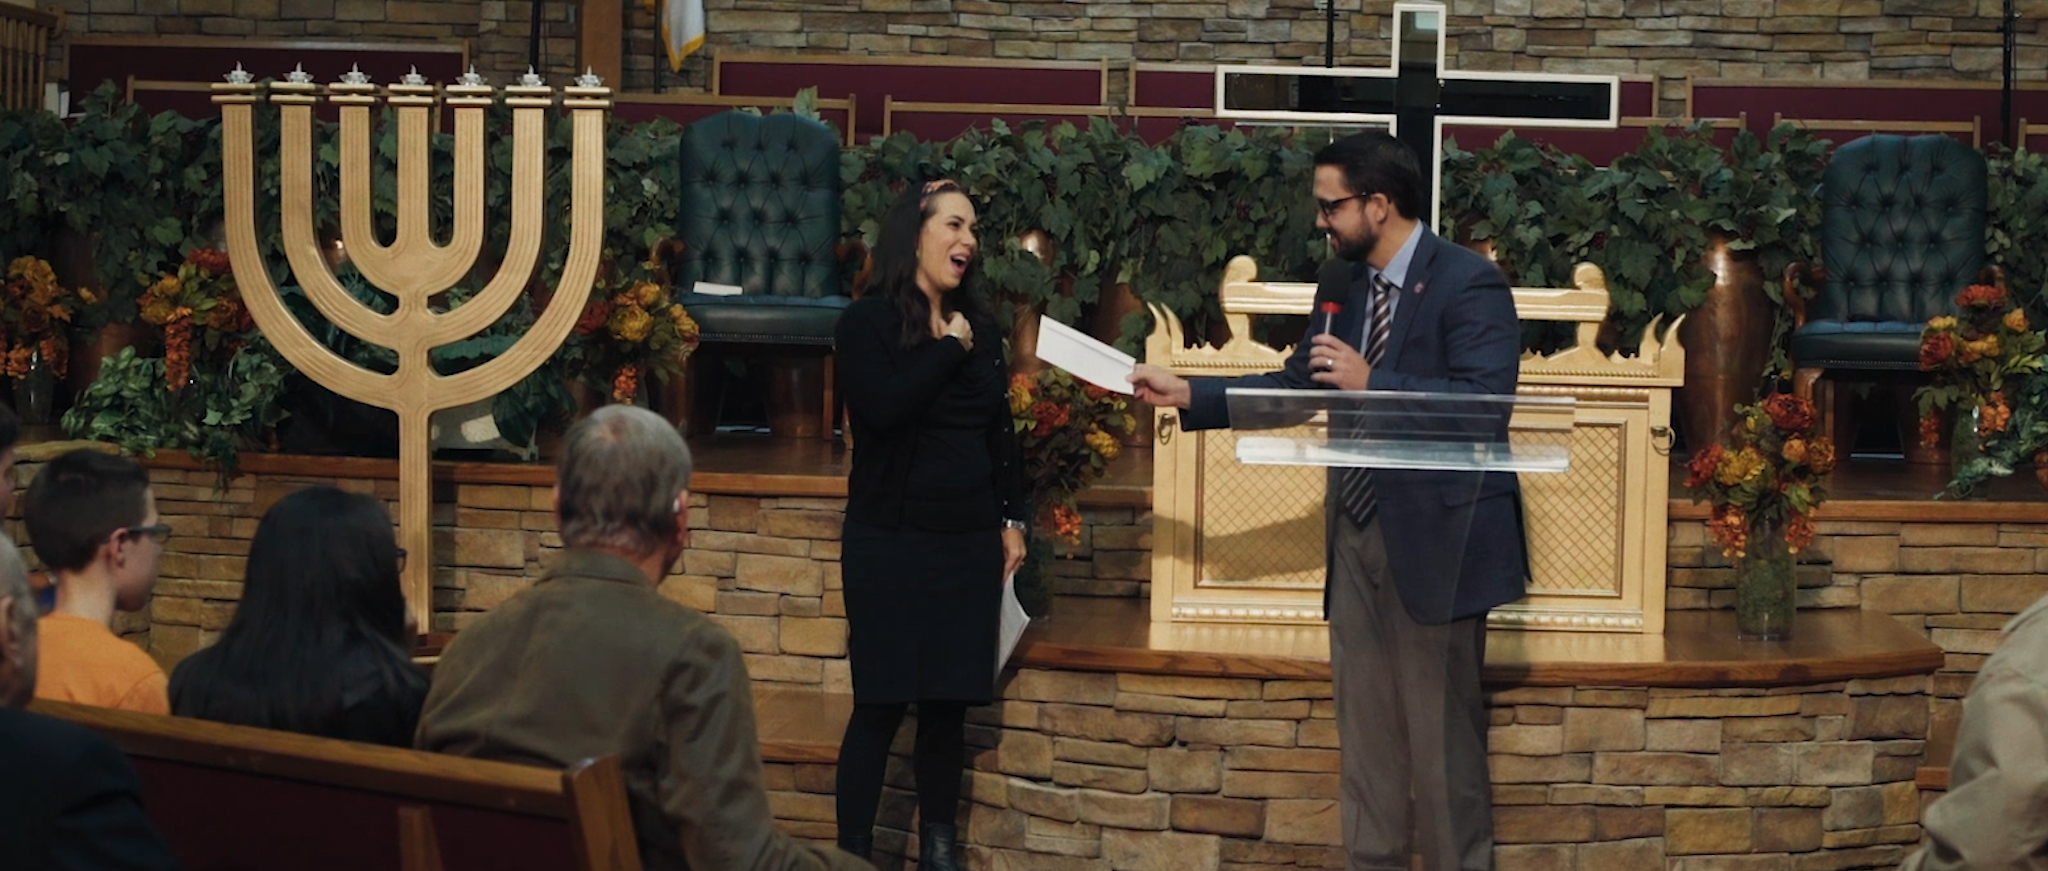 Yael Eckstein receives a $25,000 donation from the community in Middlesboro, Kentucky [Til Kingdom Come]